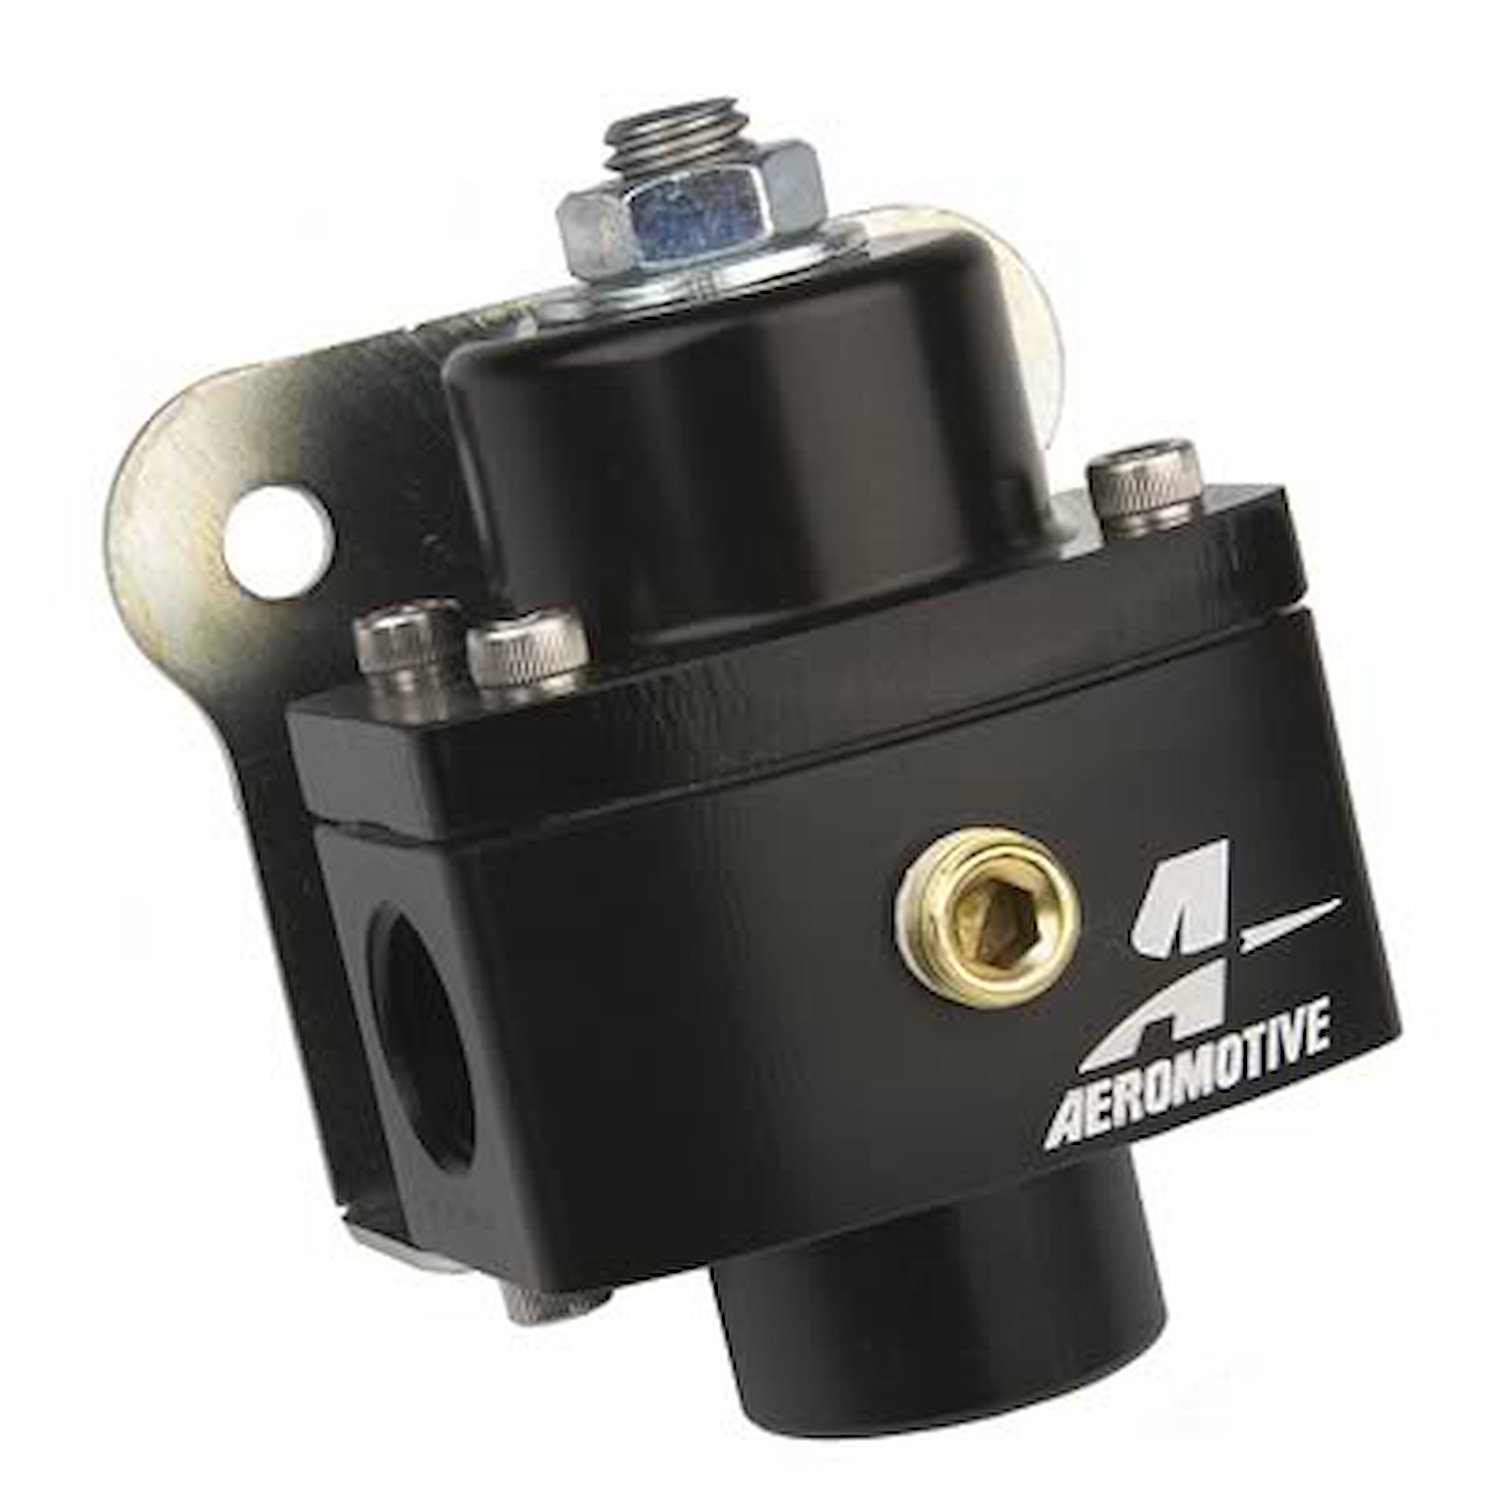 Marine Regulator 3/8" NPT Female Inlet and Outlet Ports